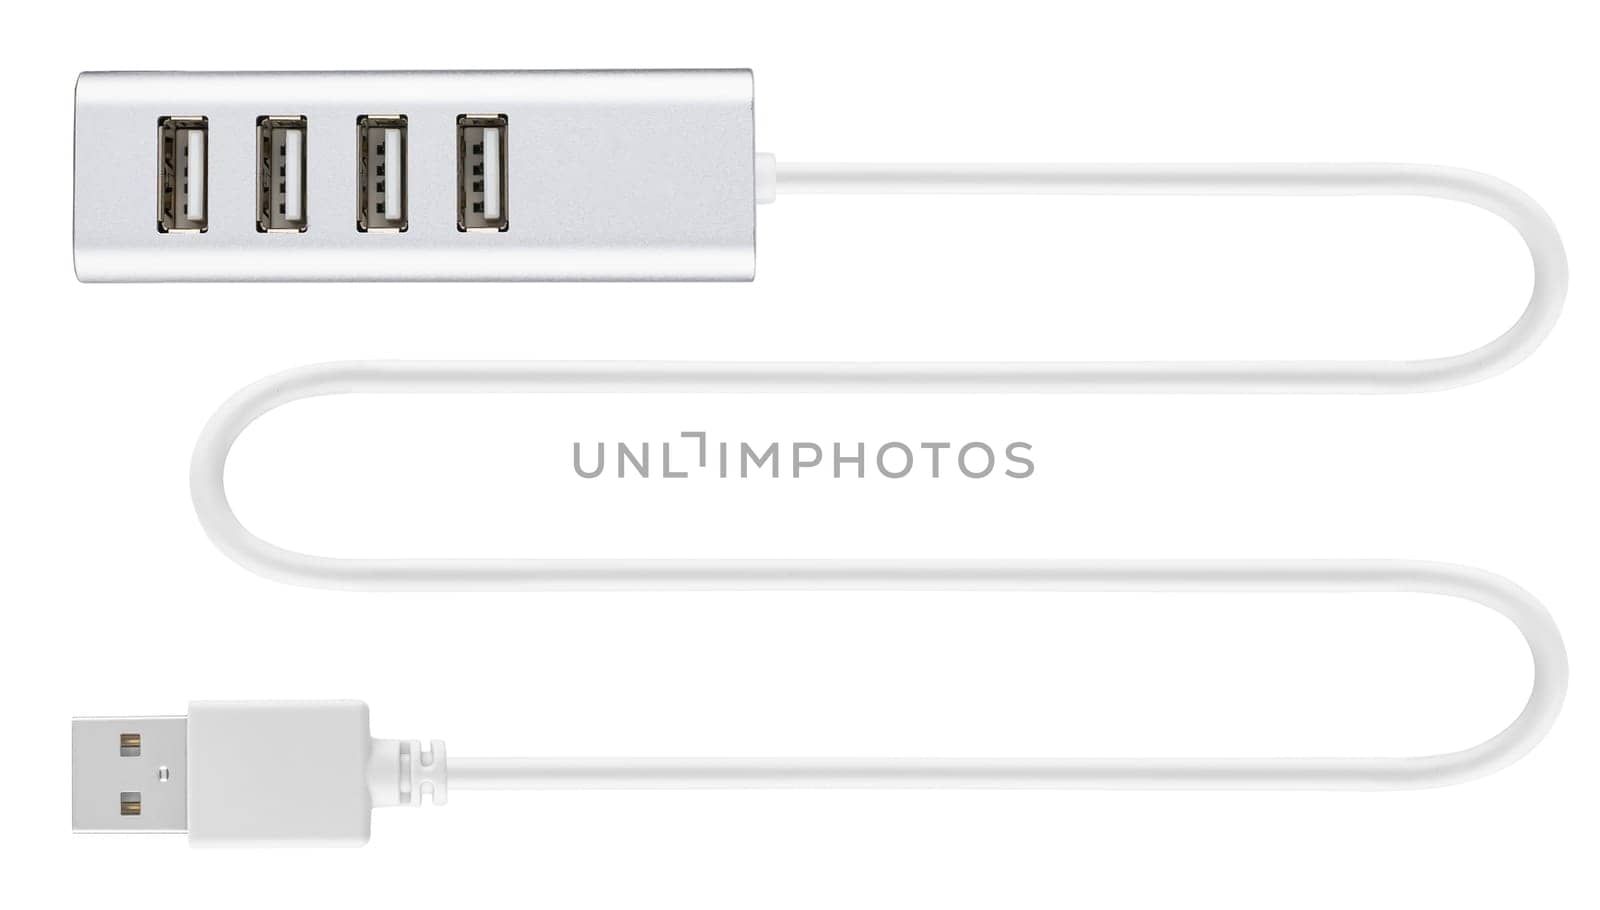 USB hub for four USB ports on white background in insulation